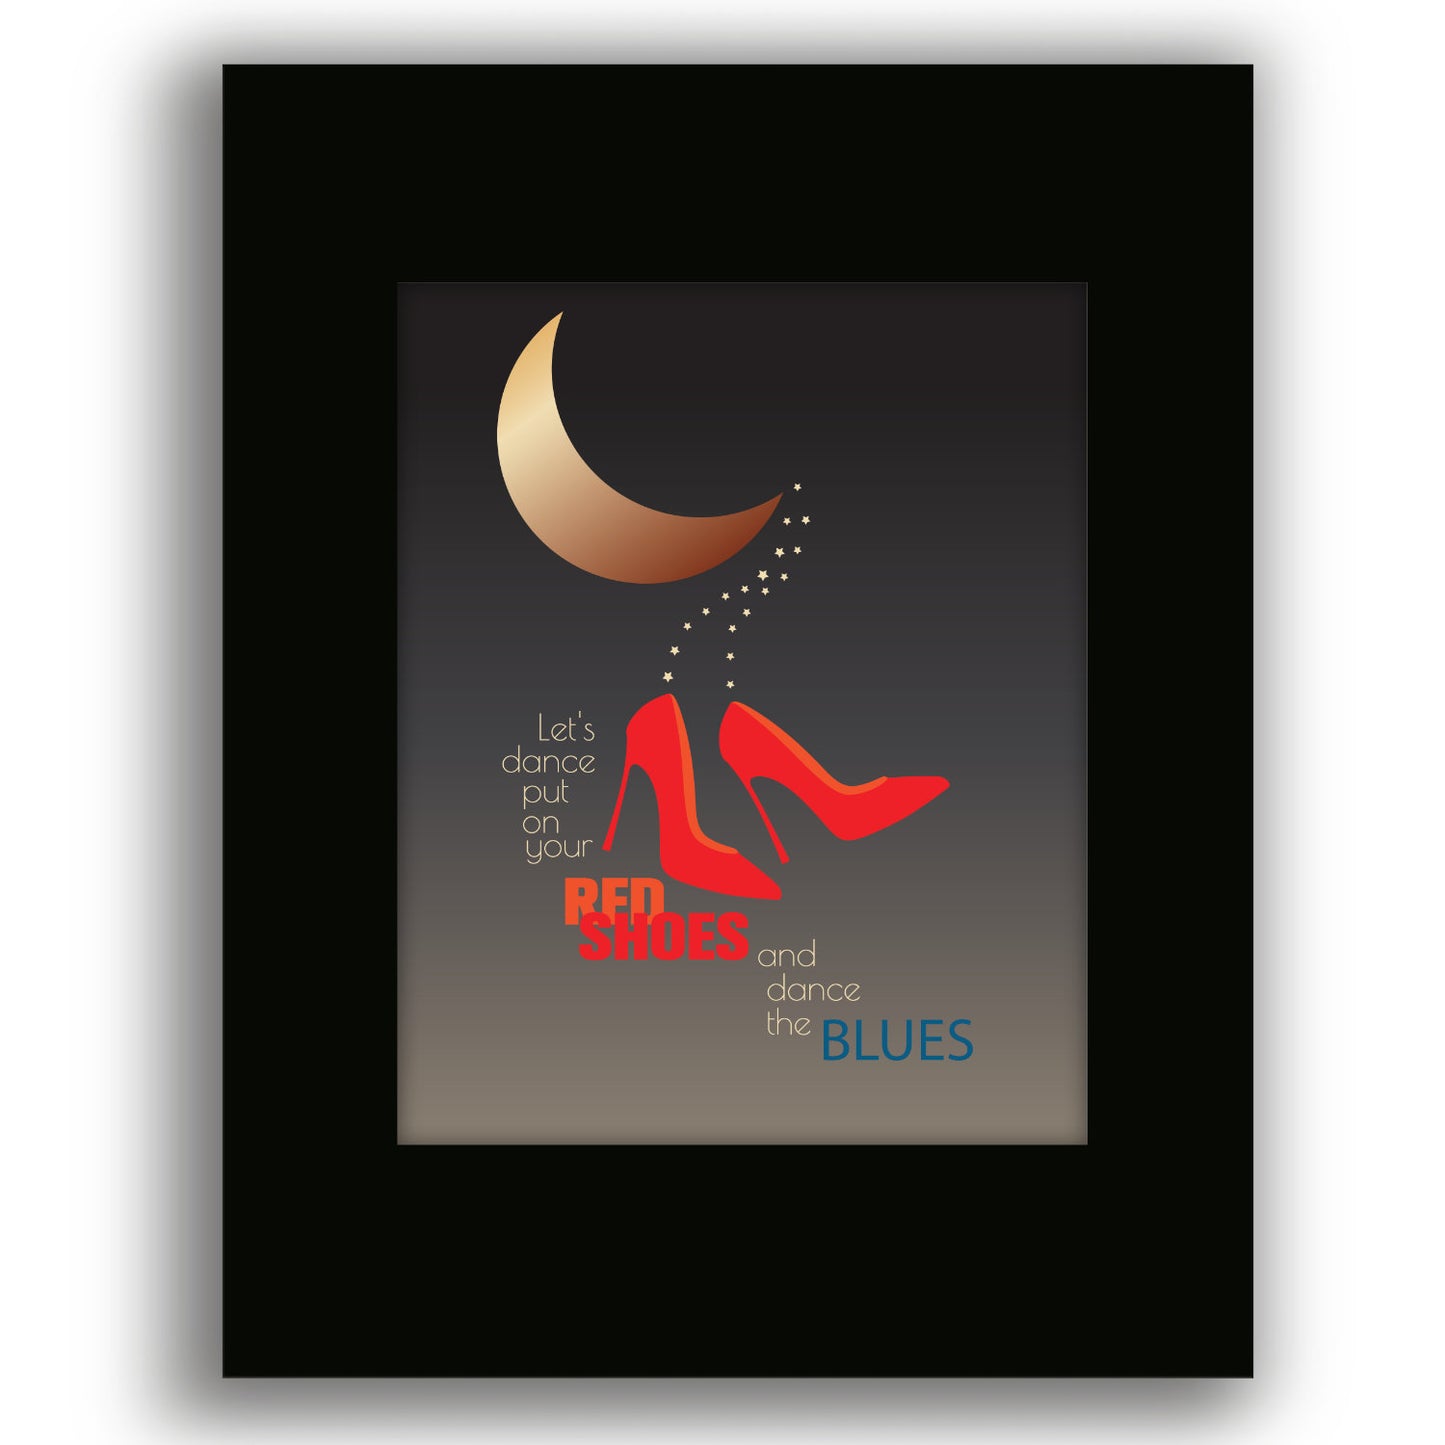 Lets Dance by David Bowie - Wall Decor Print Lyric Song Art